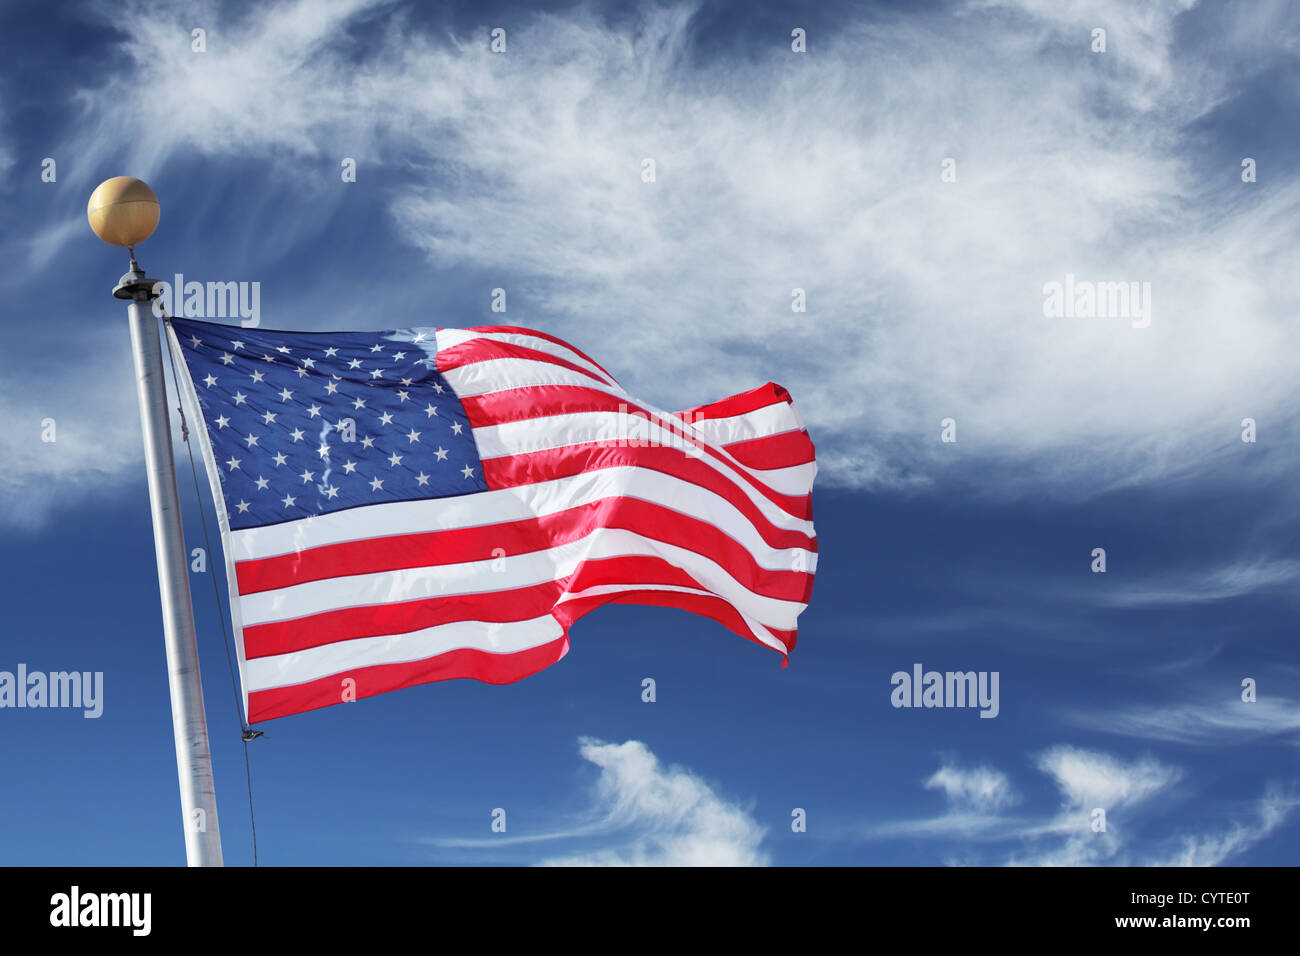 Windblown flag of the United States of America over sky background Stock Photo